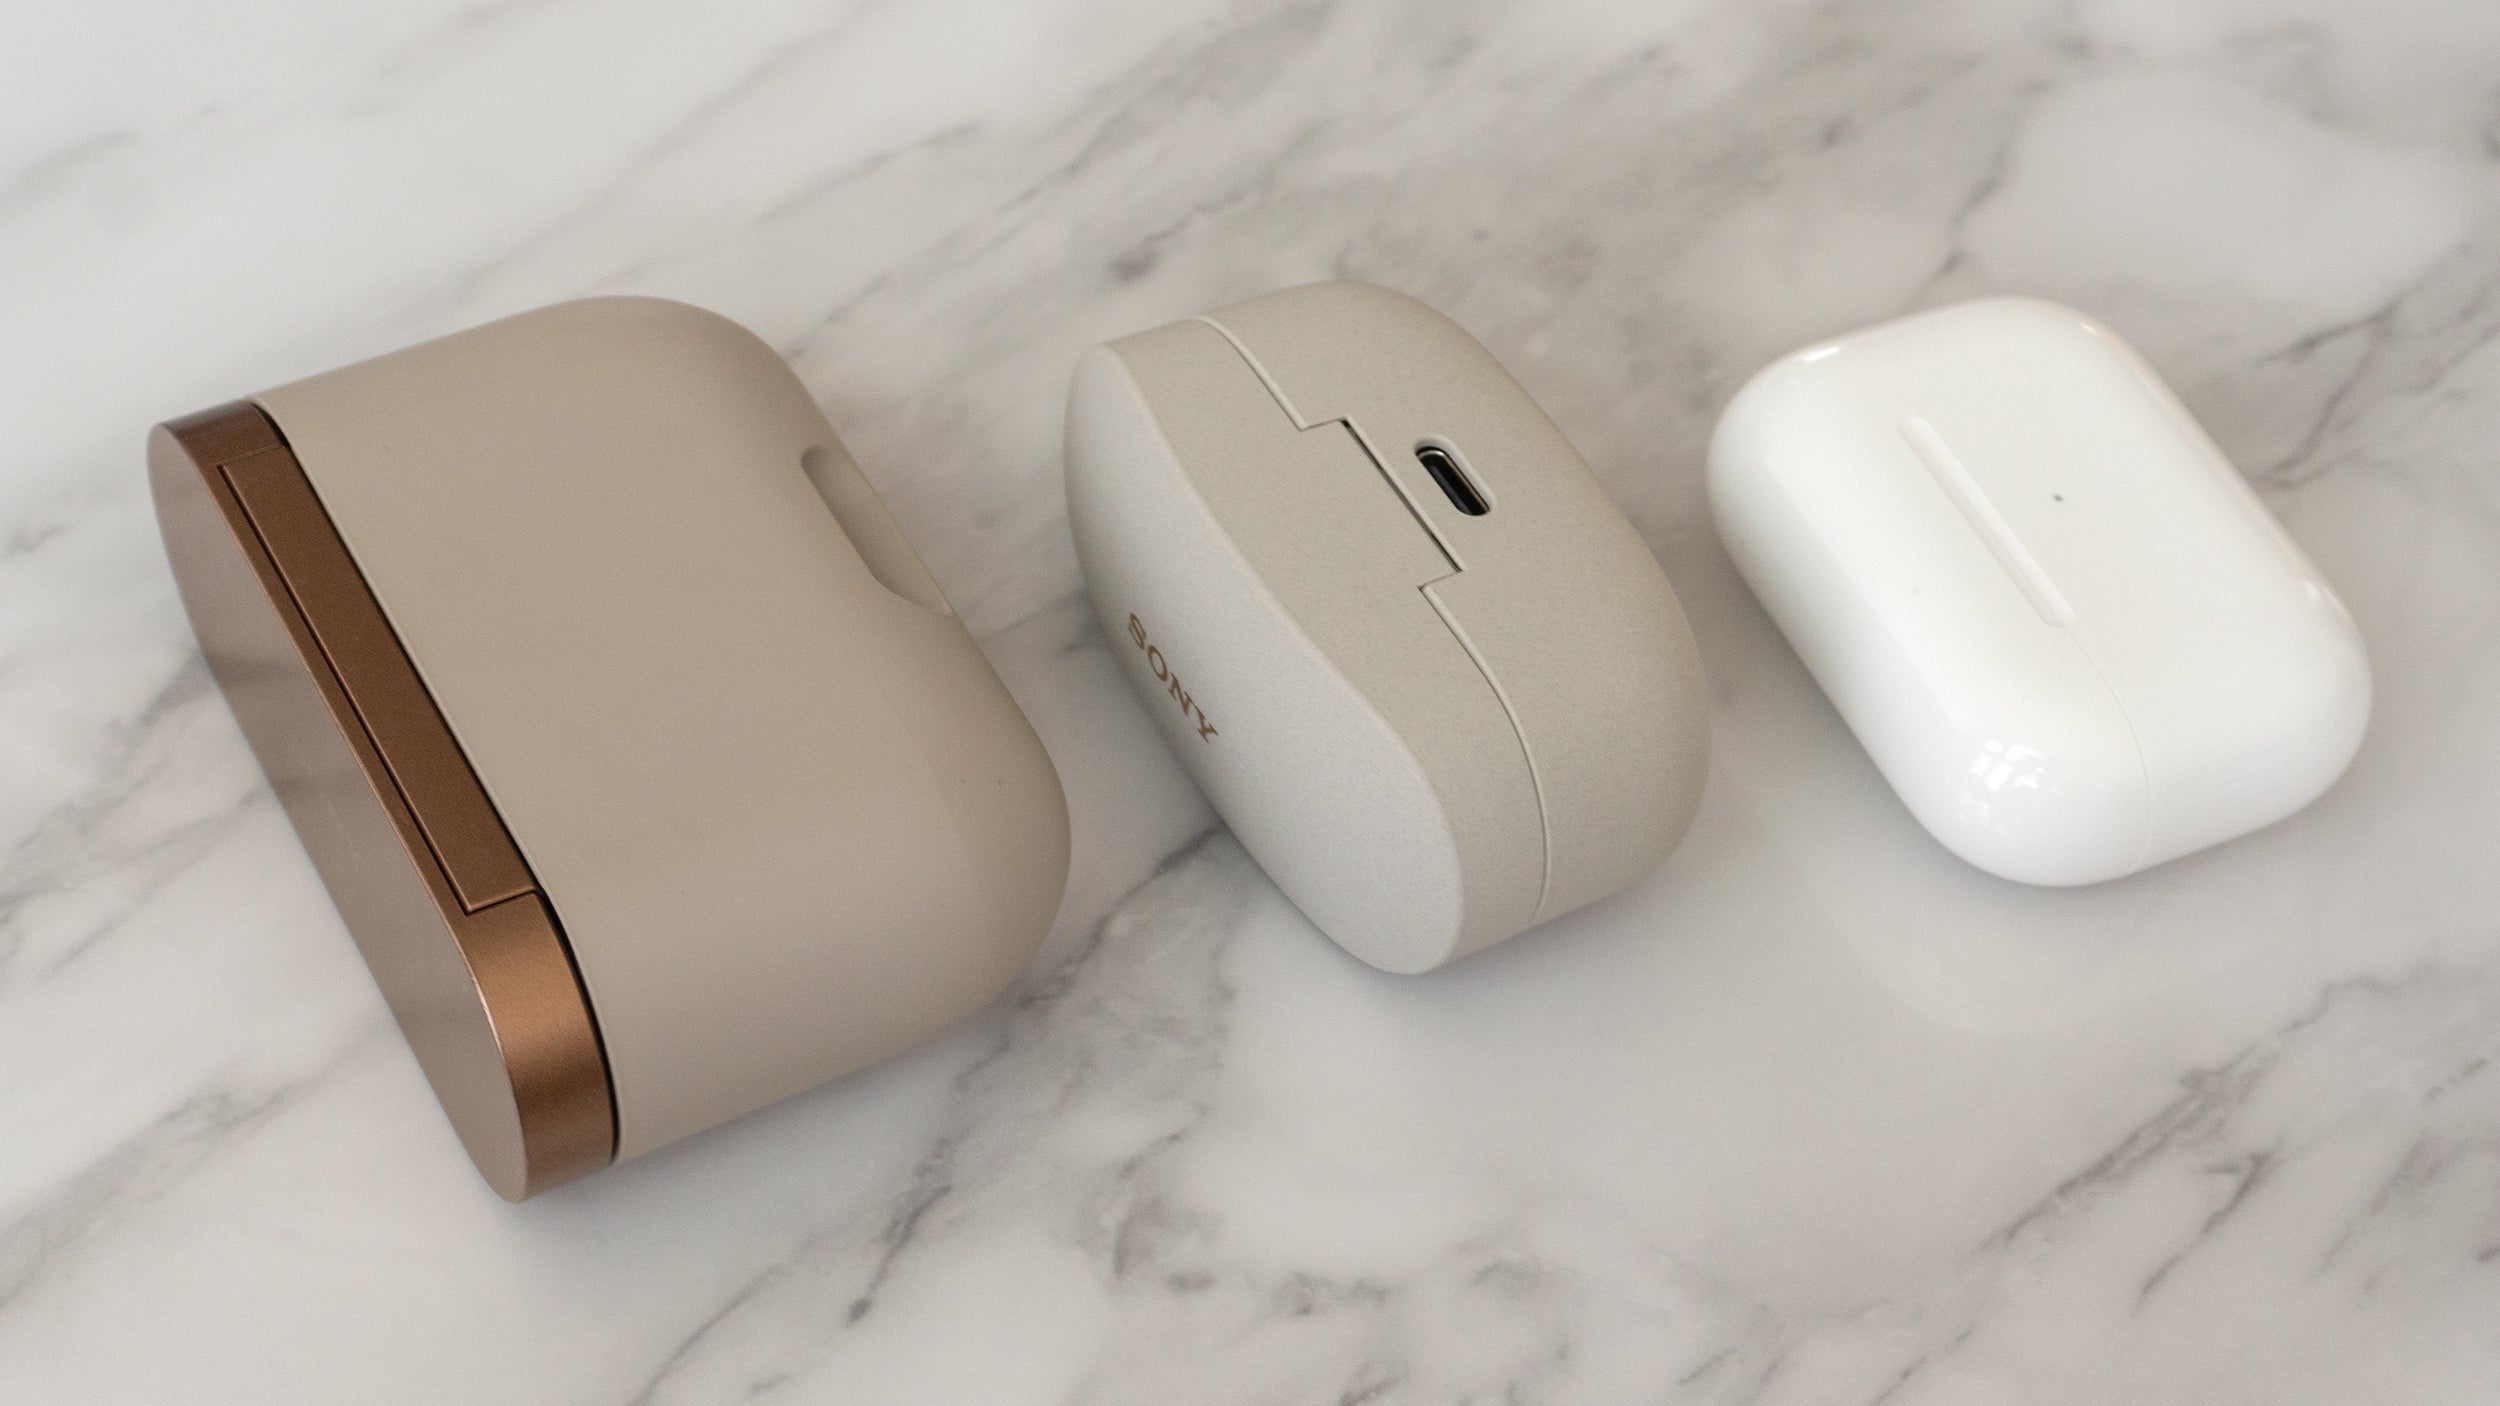 The charging case for Sony's WF-1000XM3 earbuds was an absolute beast (left) and while the charging case for the Sony WF-1000XM4 earbuds is about half the size (centre), it's still not quite as small and pocketable as the AirPods Pro charging case (right). (Photo: Andrew Liszewski/Gizmodo)